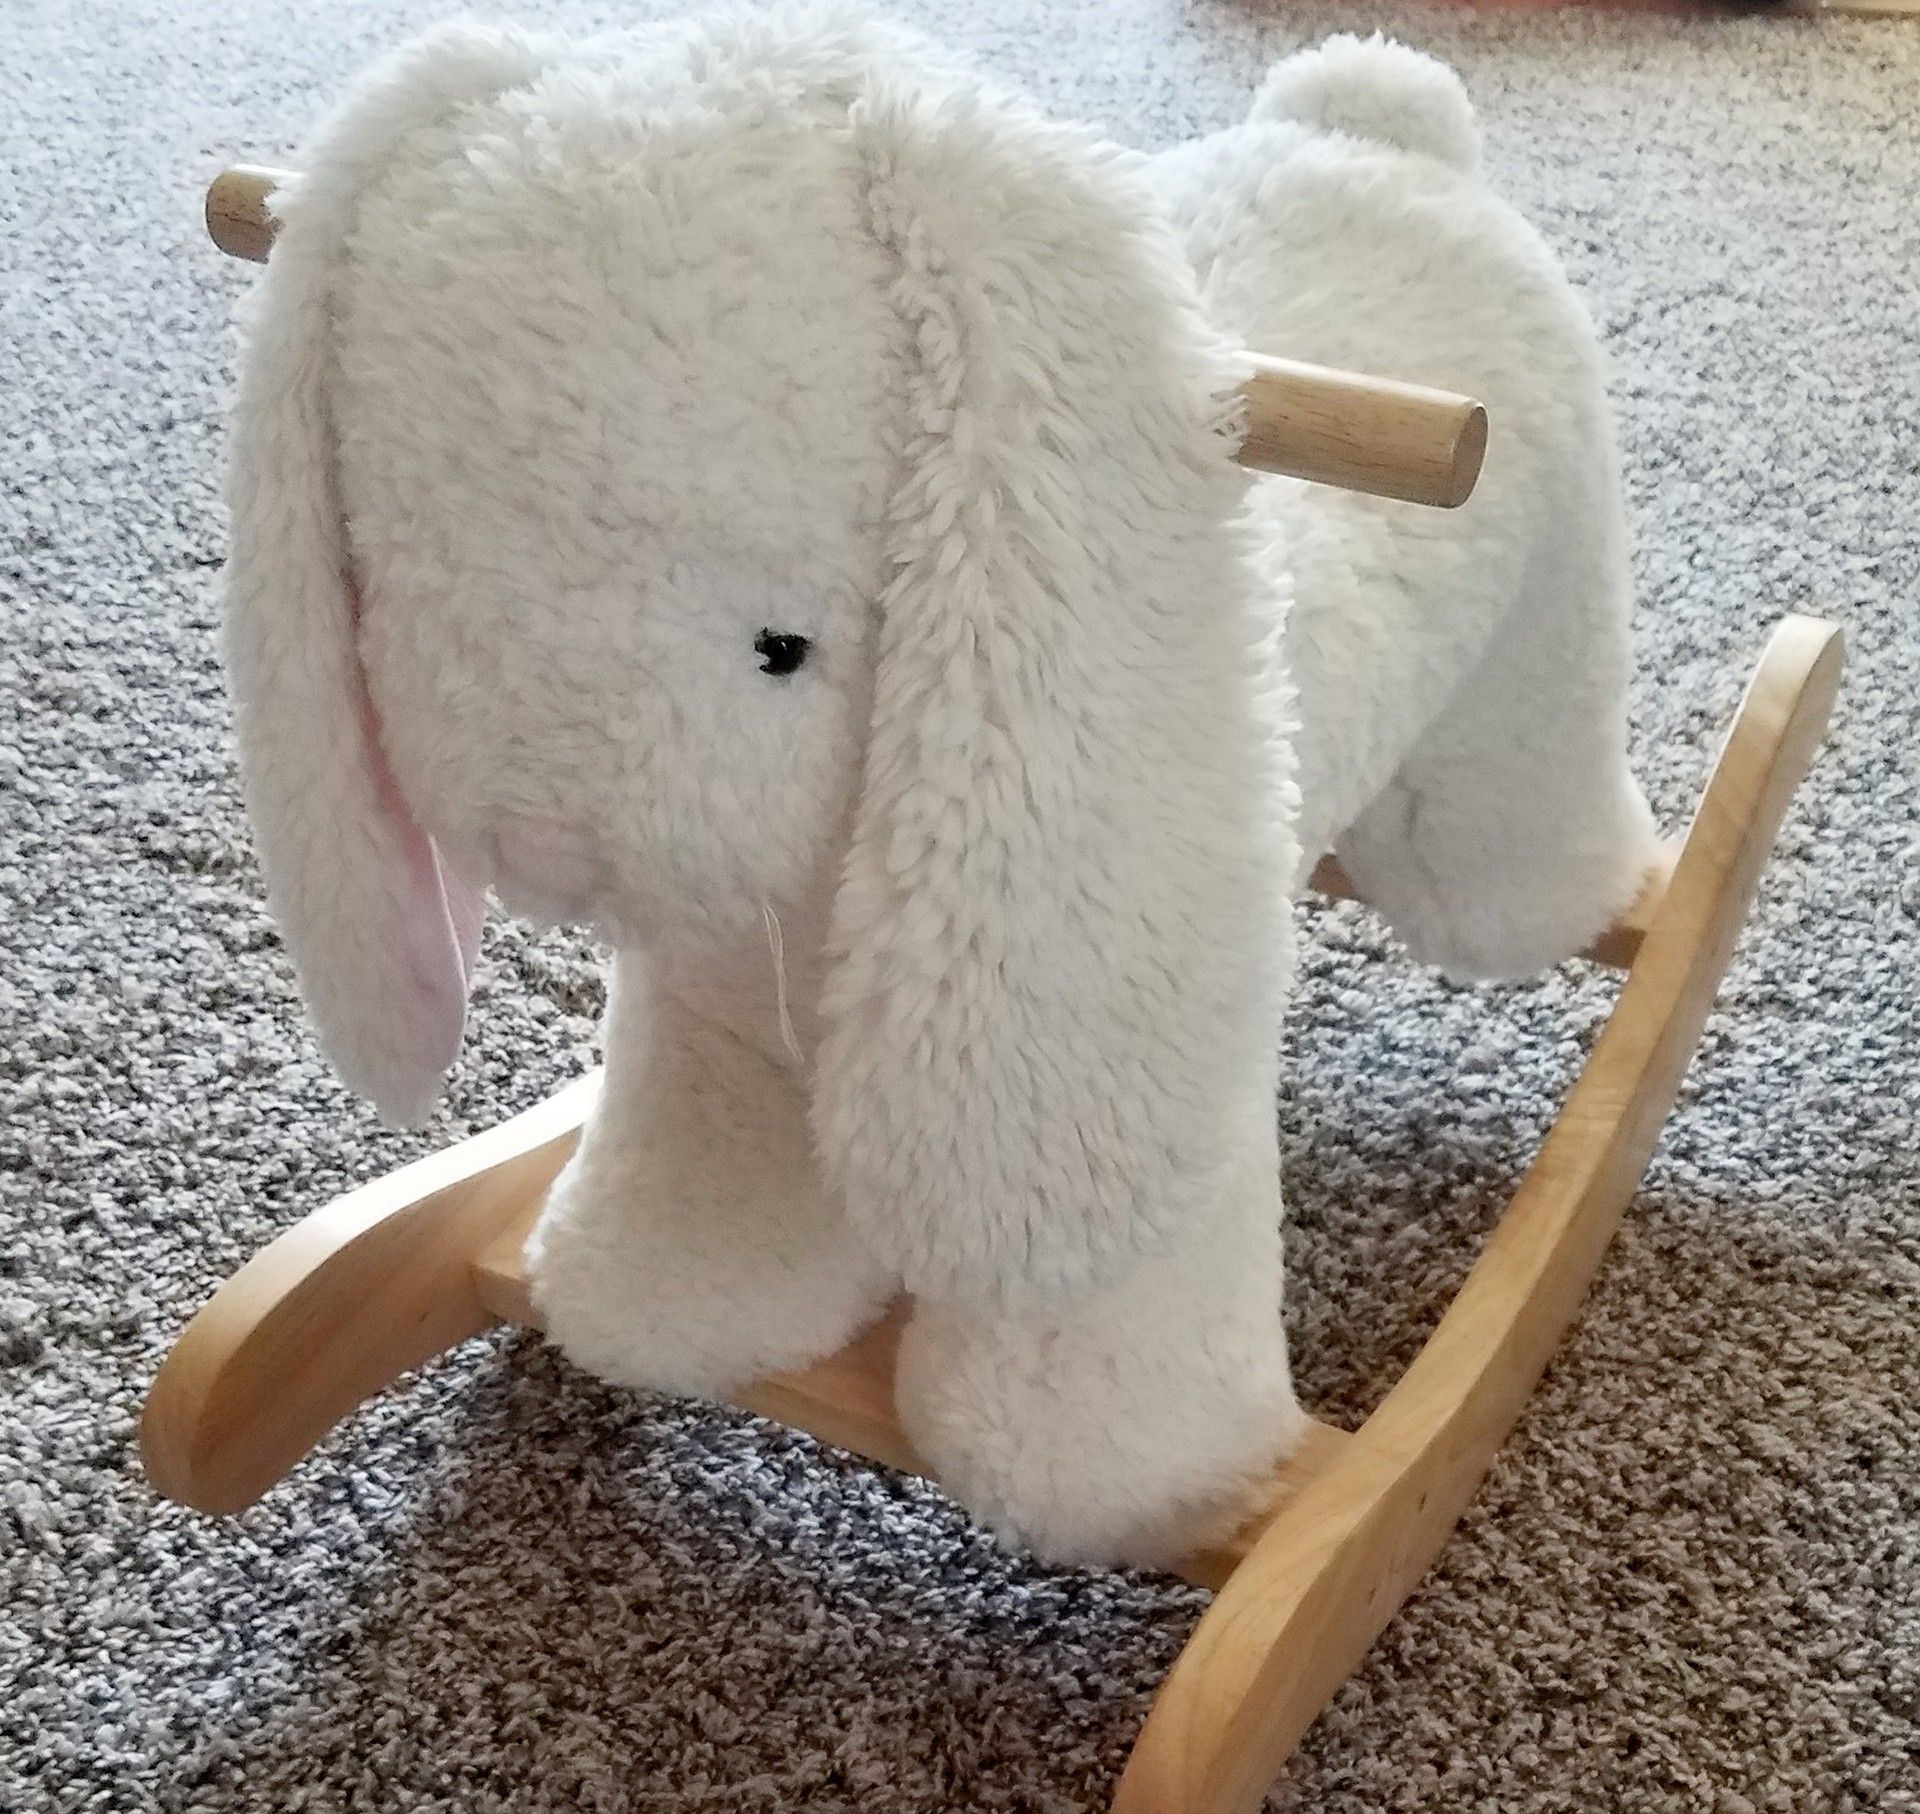 Pottery barn rocking chair toddler toys